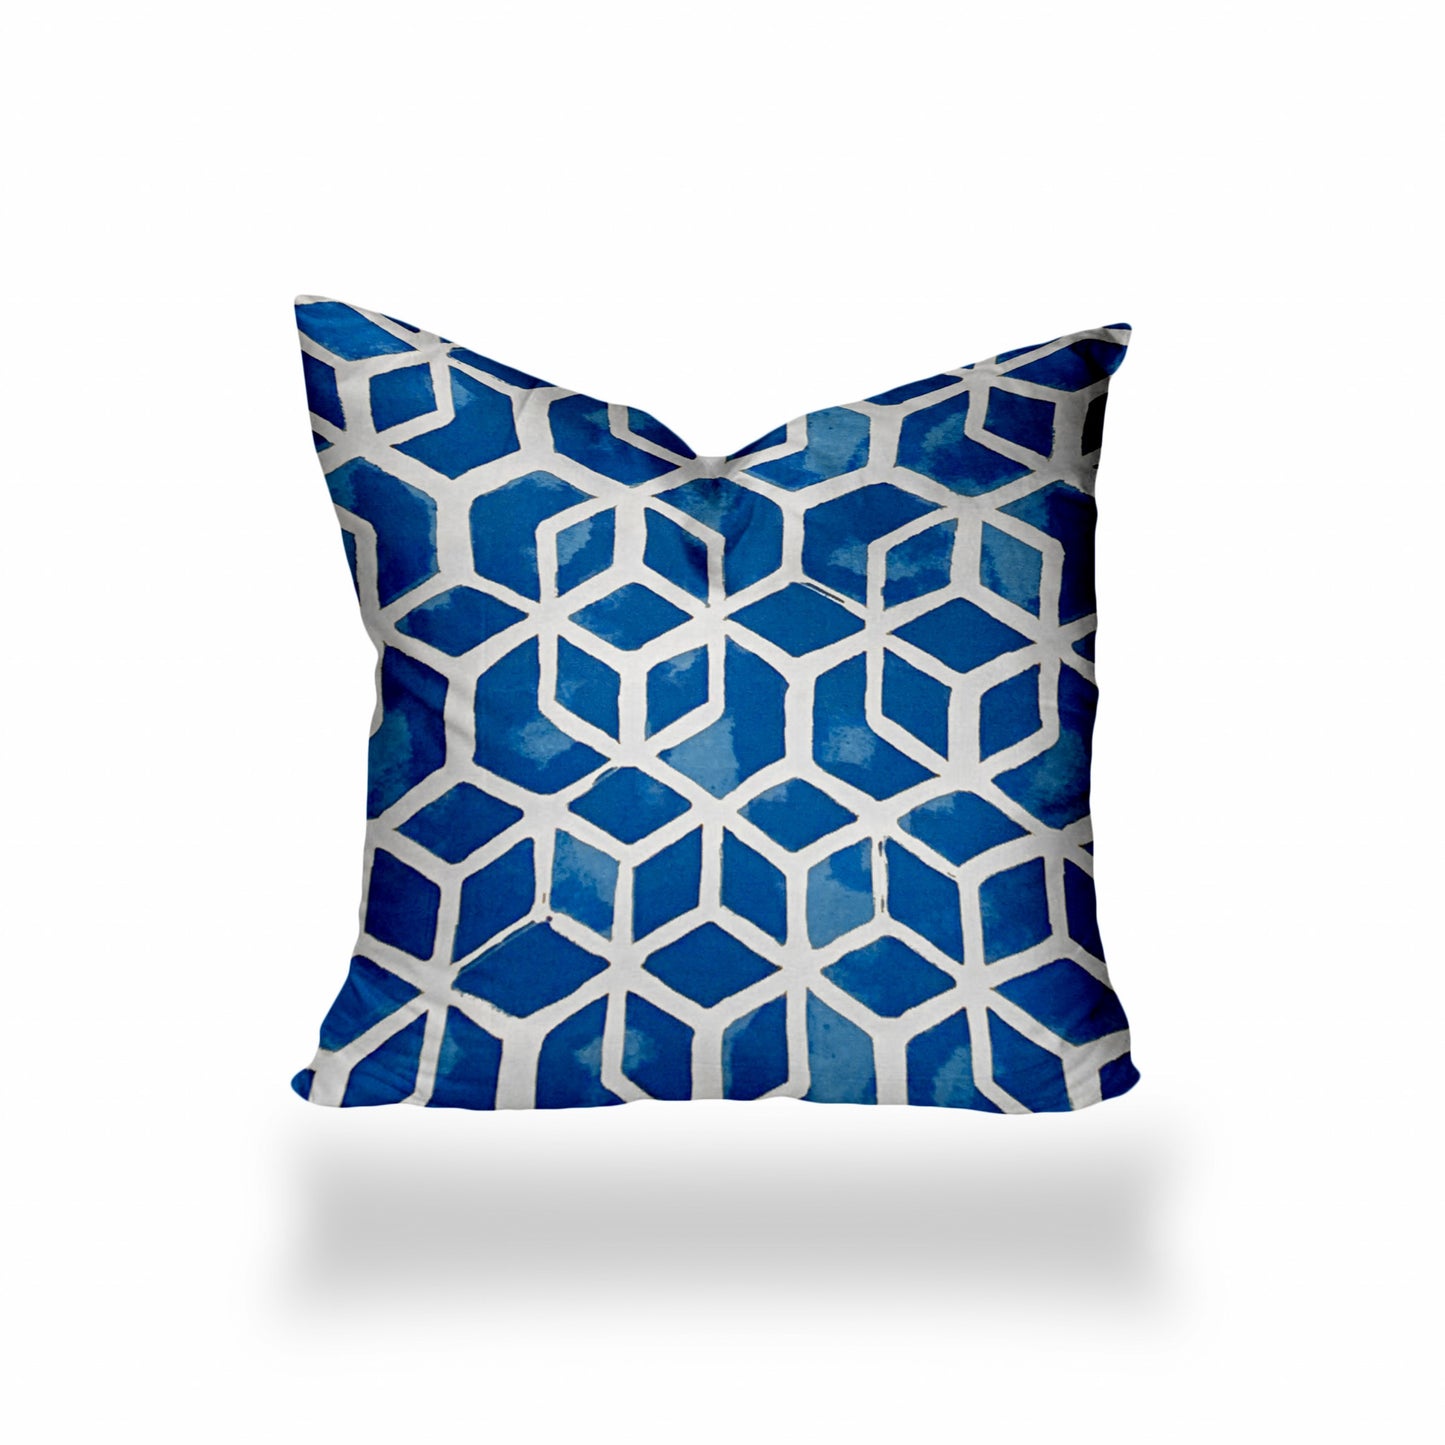 14" X 14" Blue and White Geometric Shapes Indoor Outdoor Throw Pillow Cover